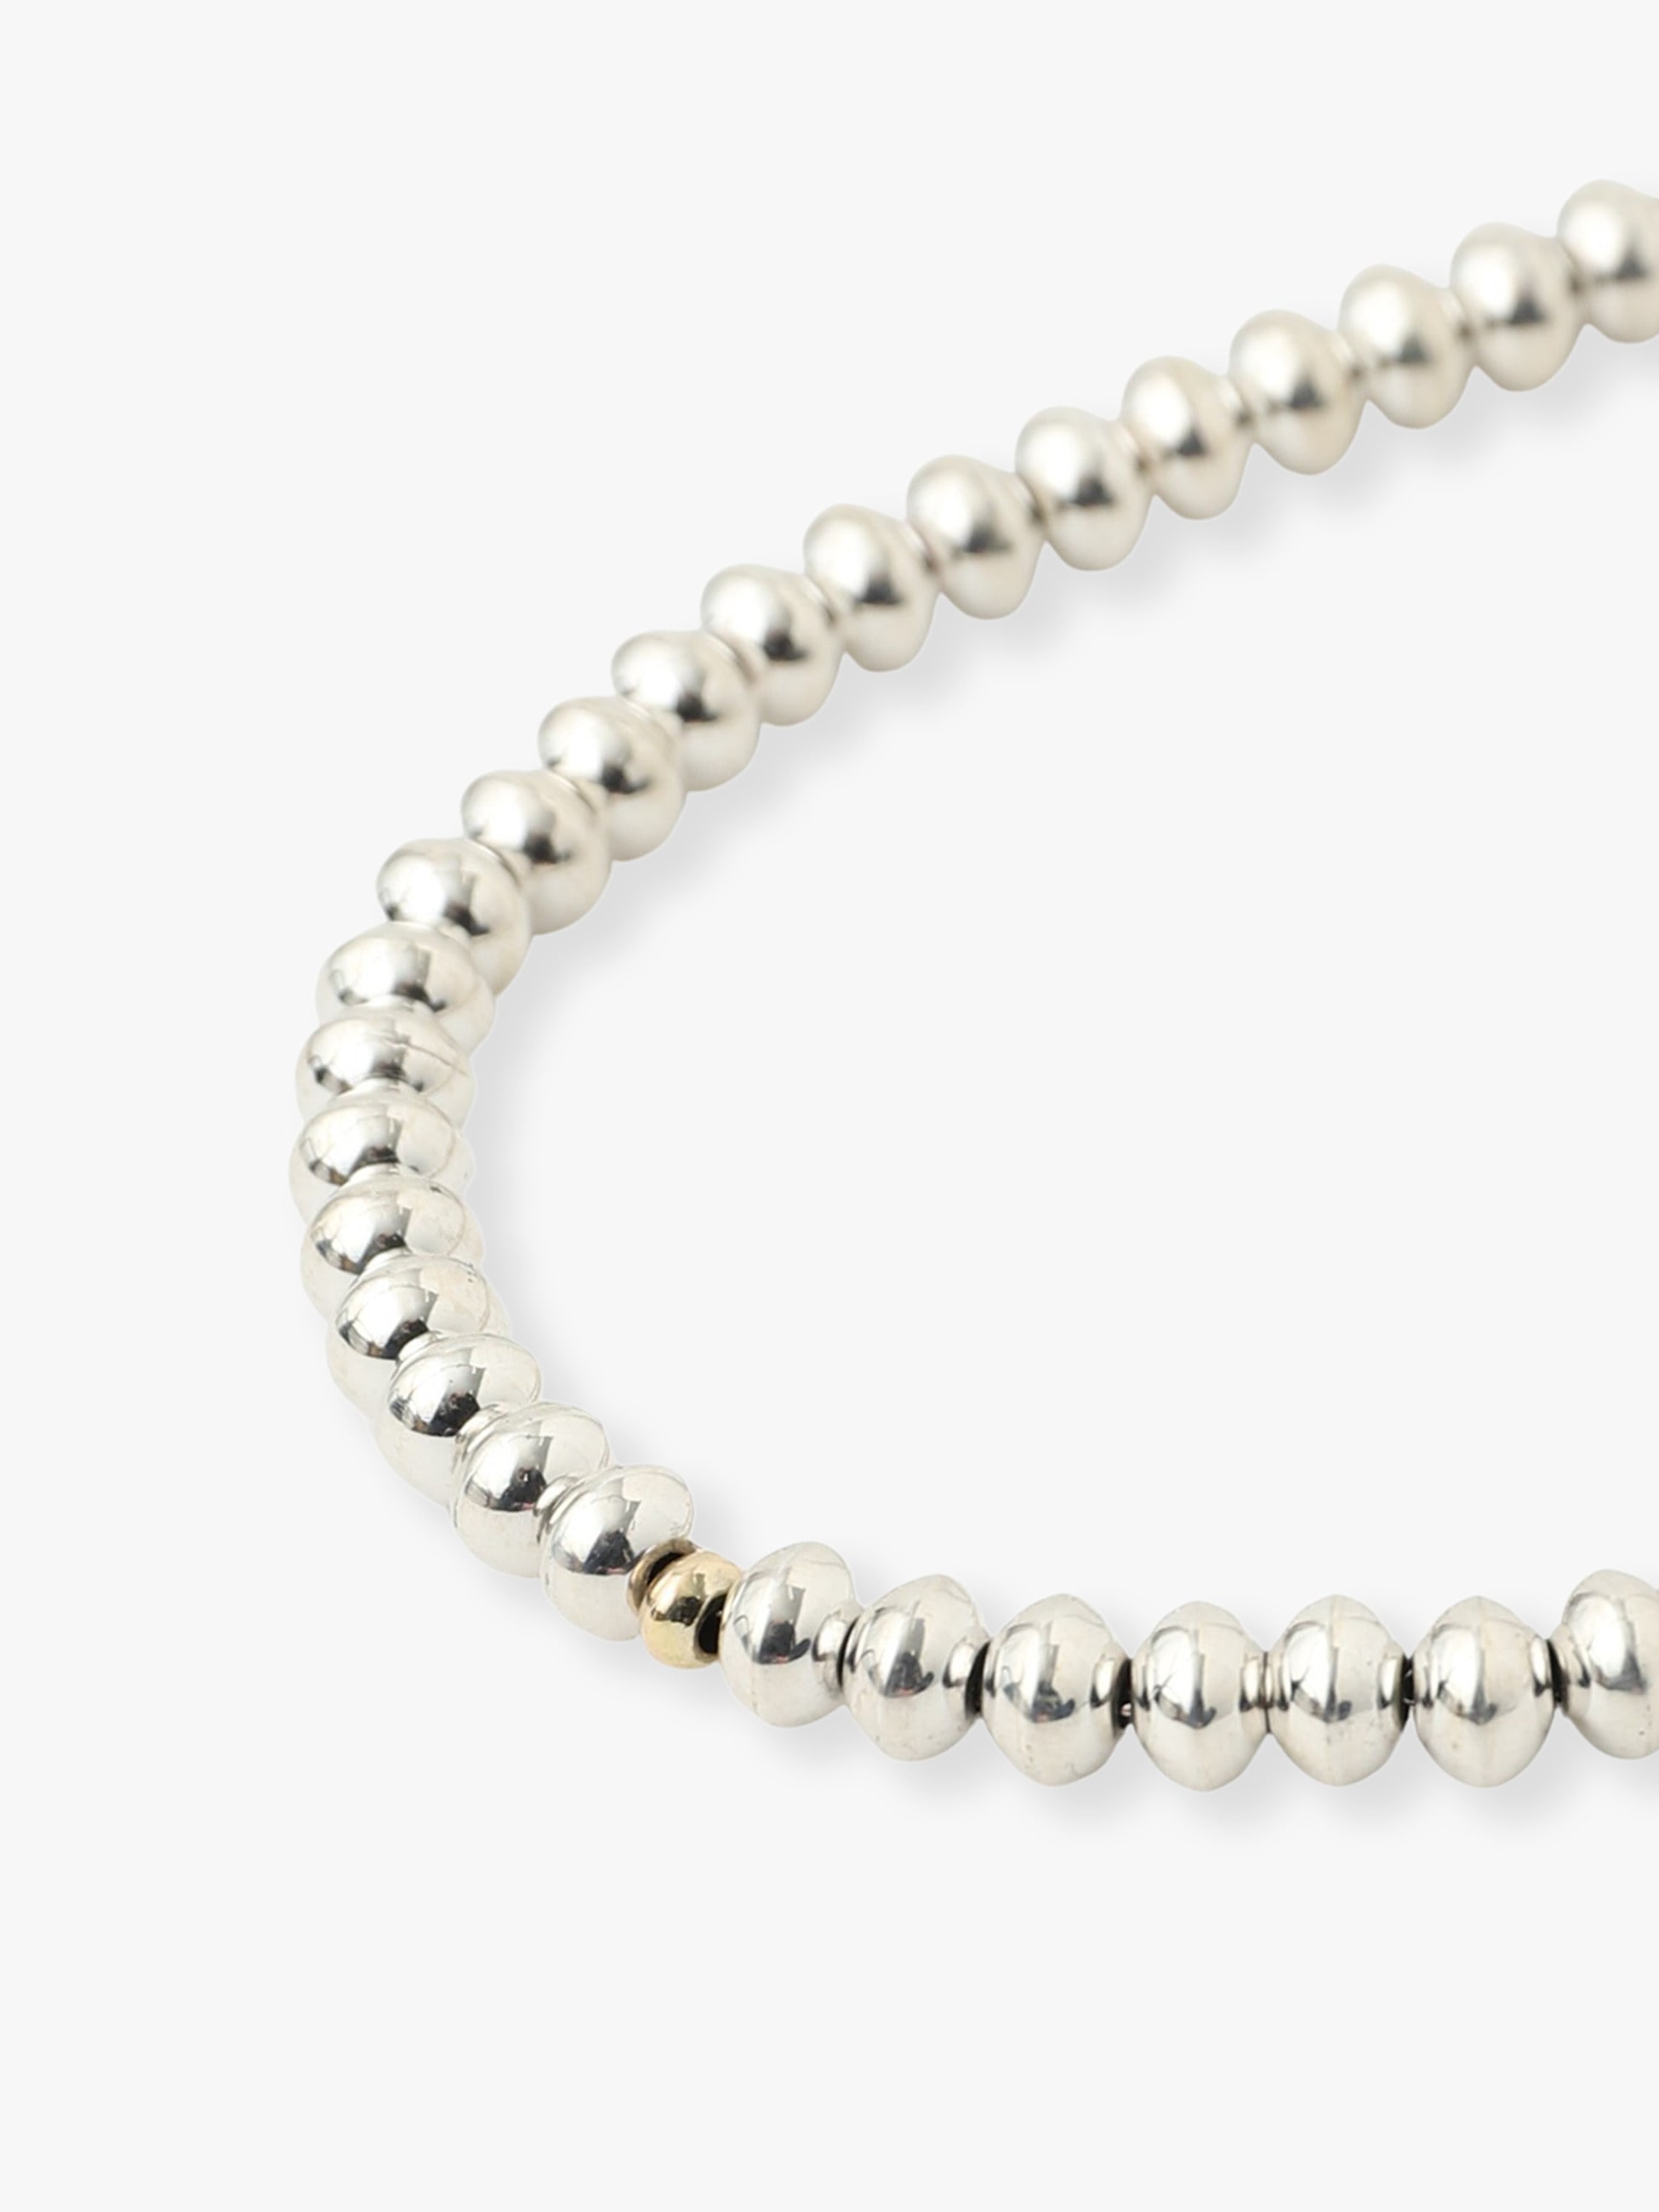 Silver Beads Necklace(31.5cm)